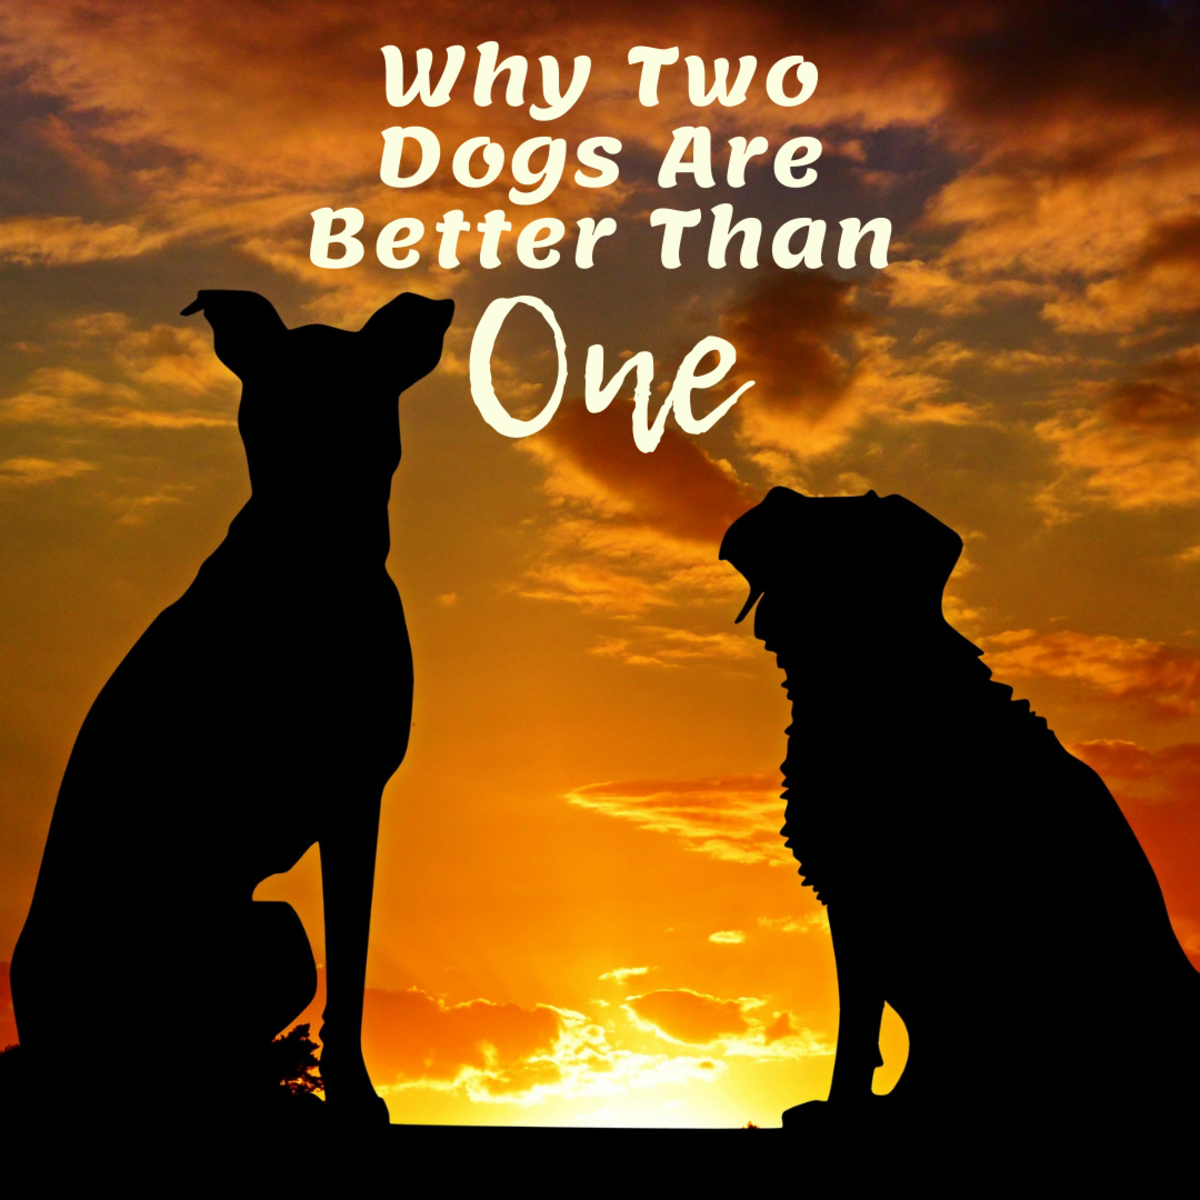 Are dogs better in pairs?